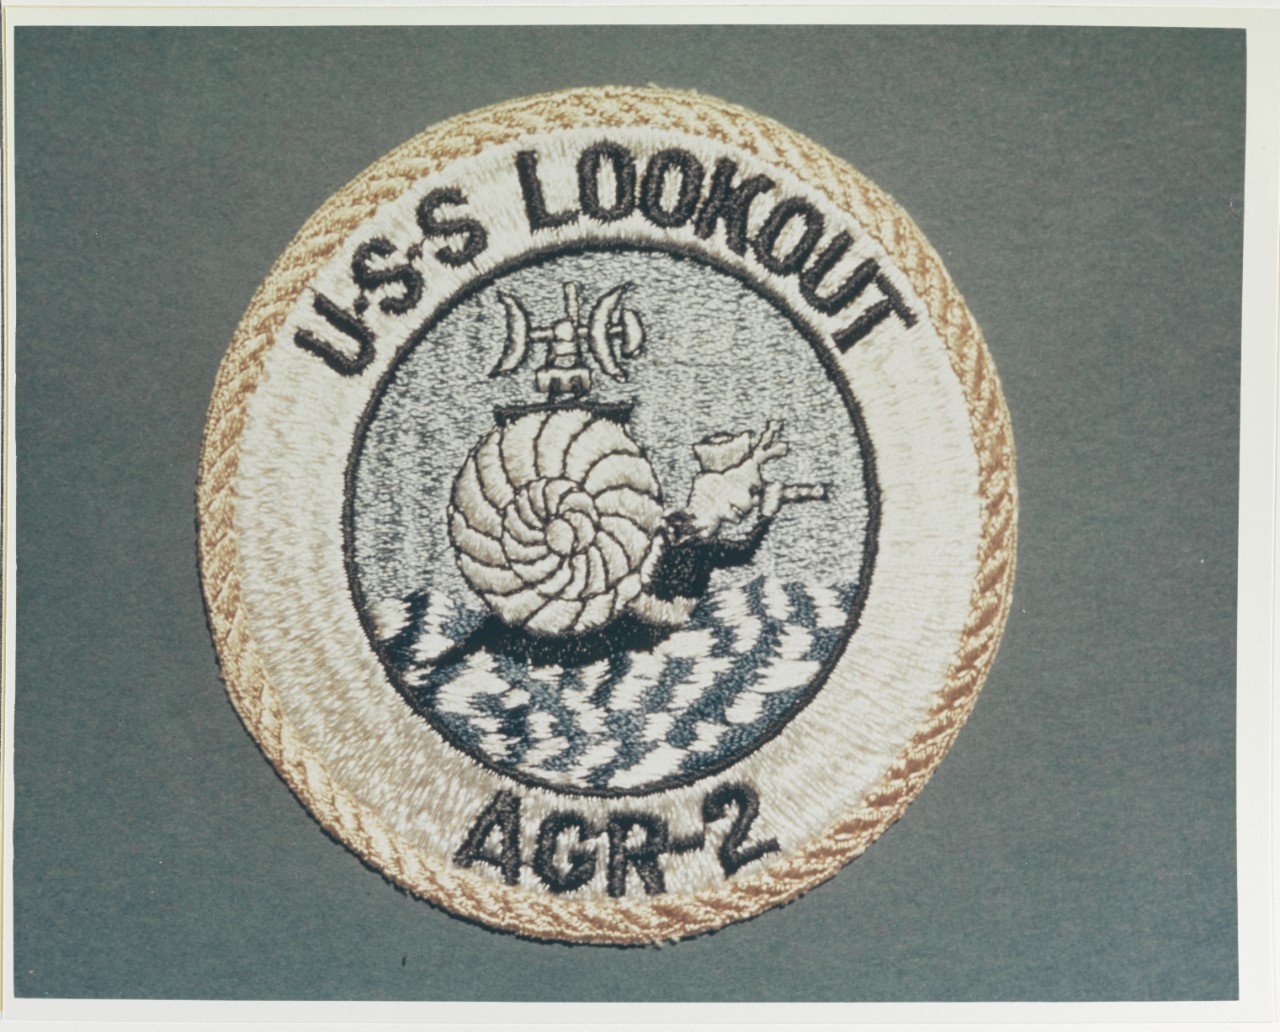 Insignia: USS LOOKOUT (AGR-2)